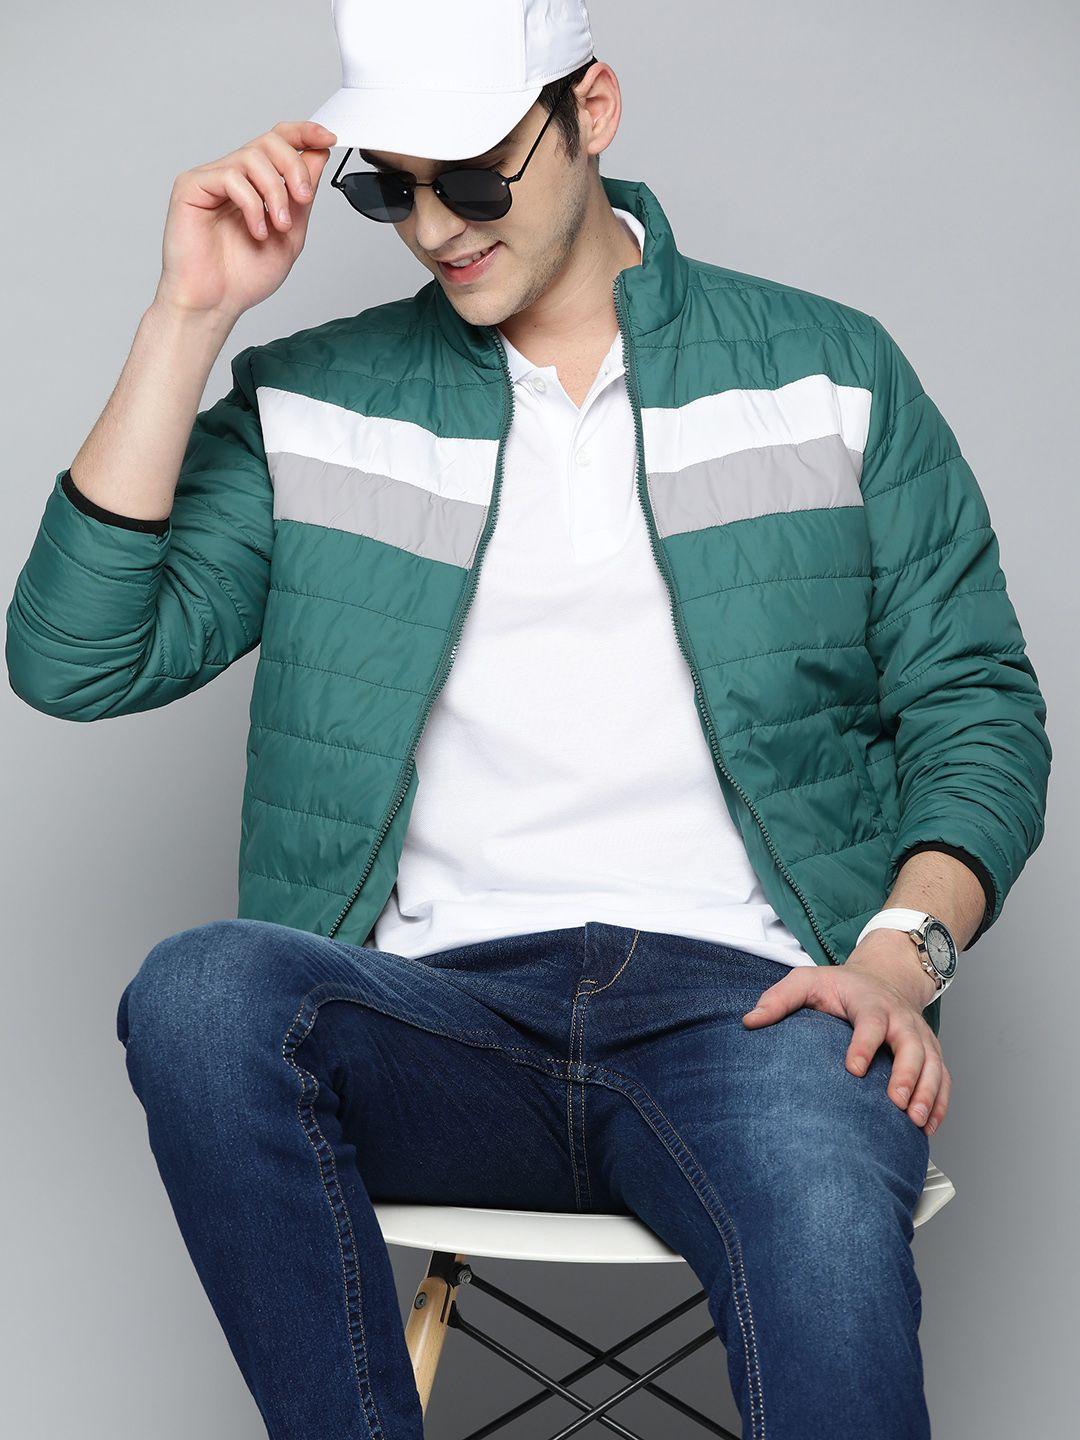 here&now men green & white striped padded jacket